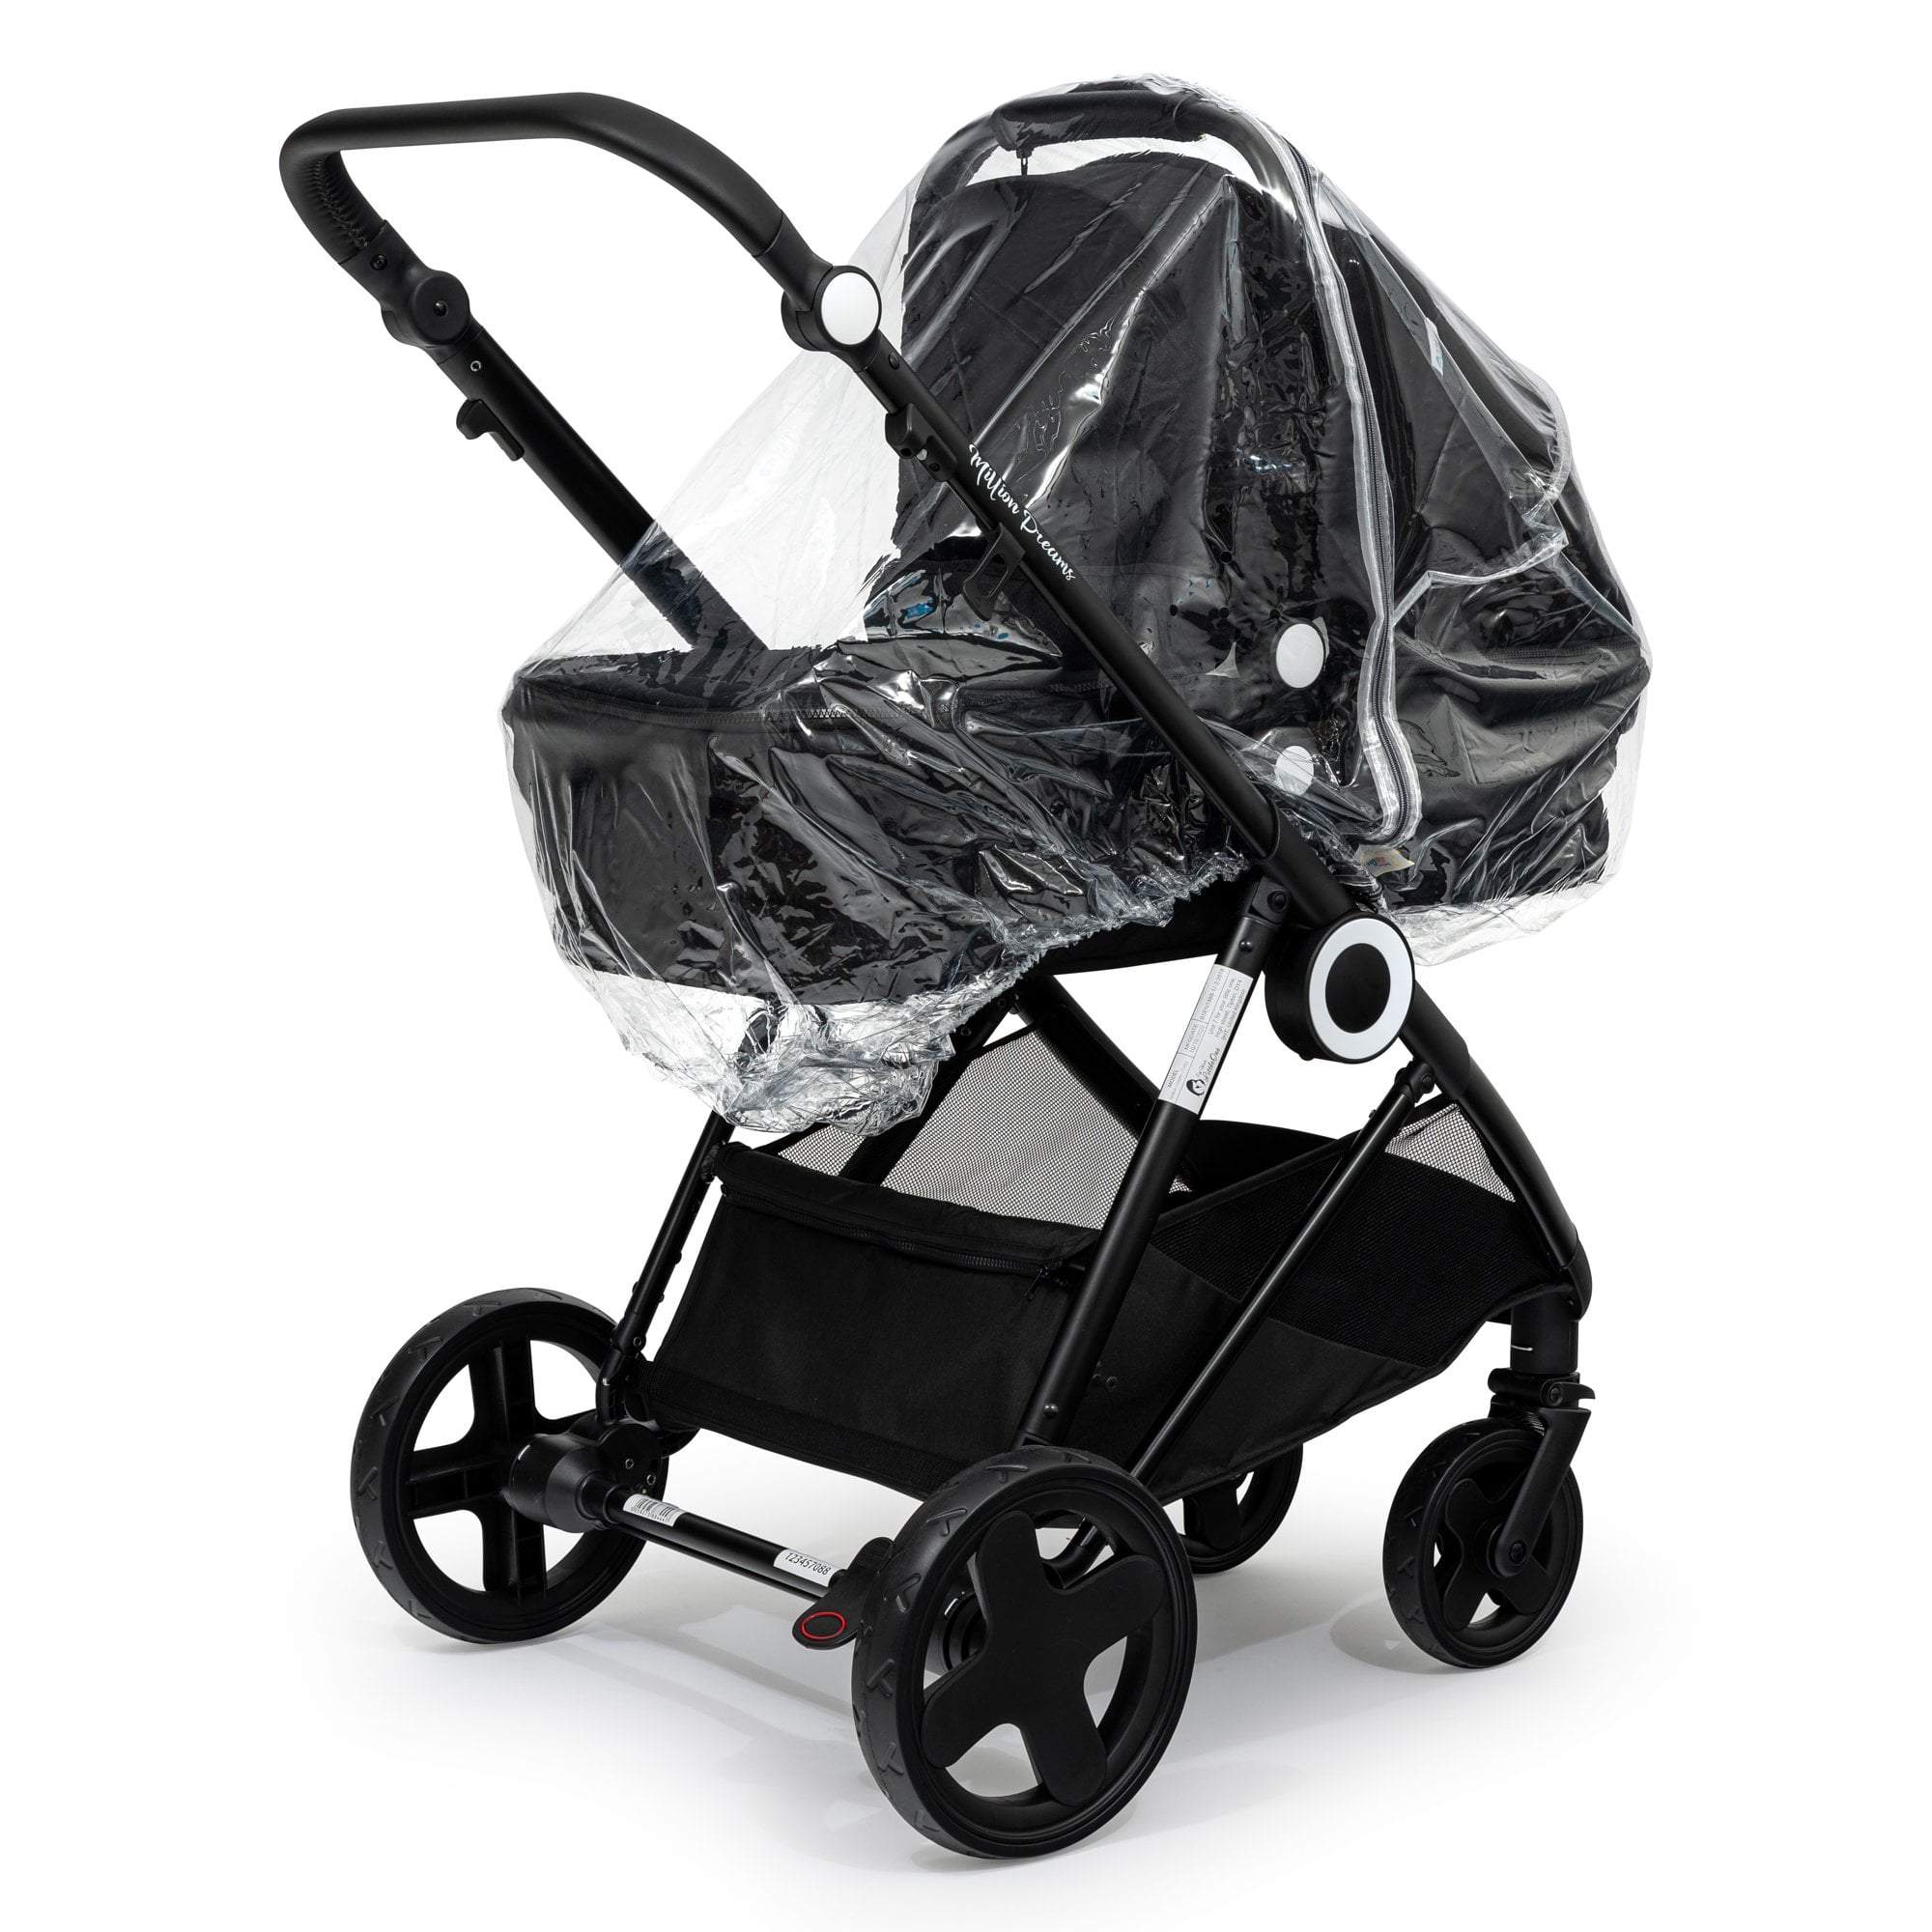 Carrycot Raincover Compatible With Egg - Fits All Models - For Your Little One